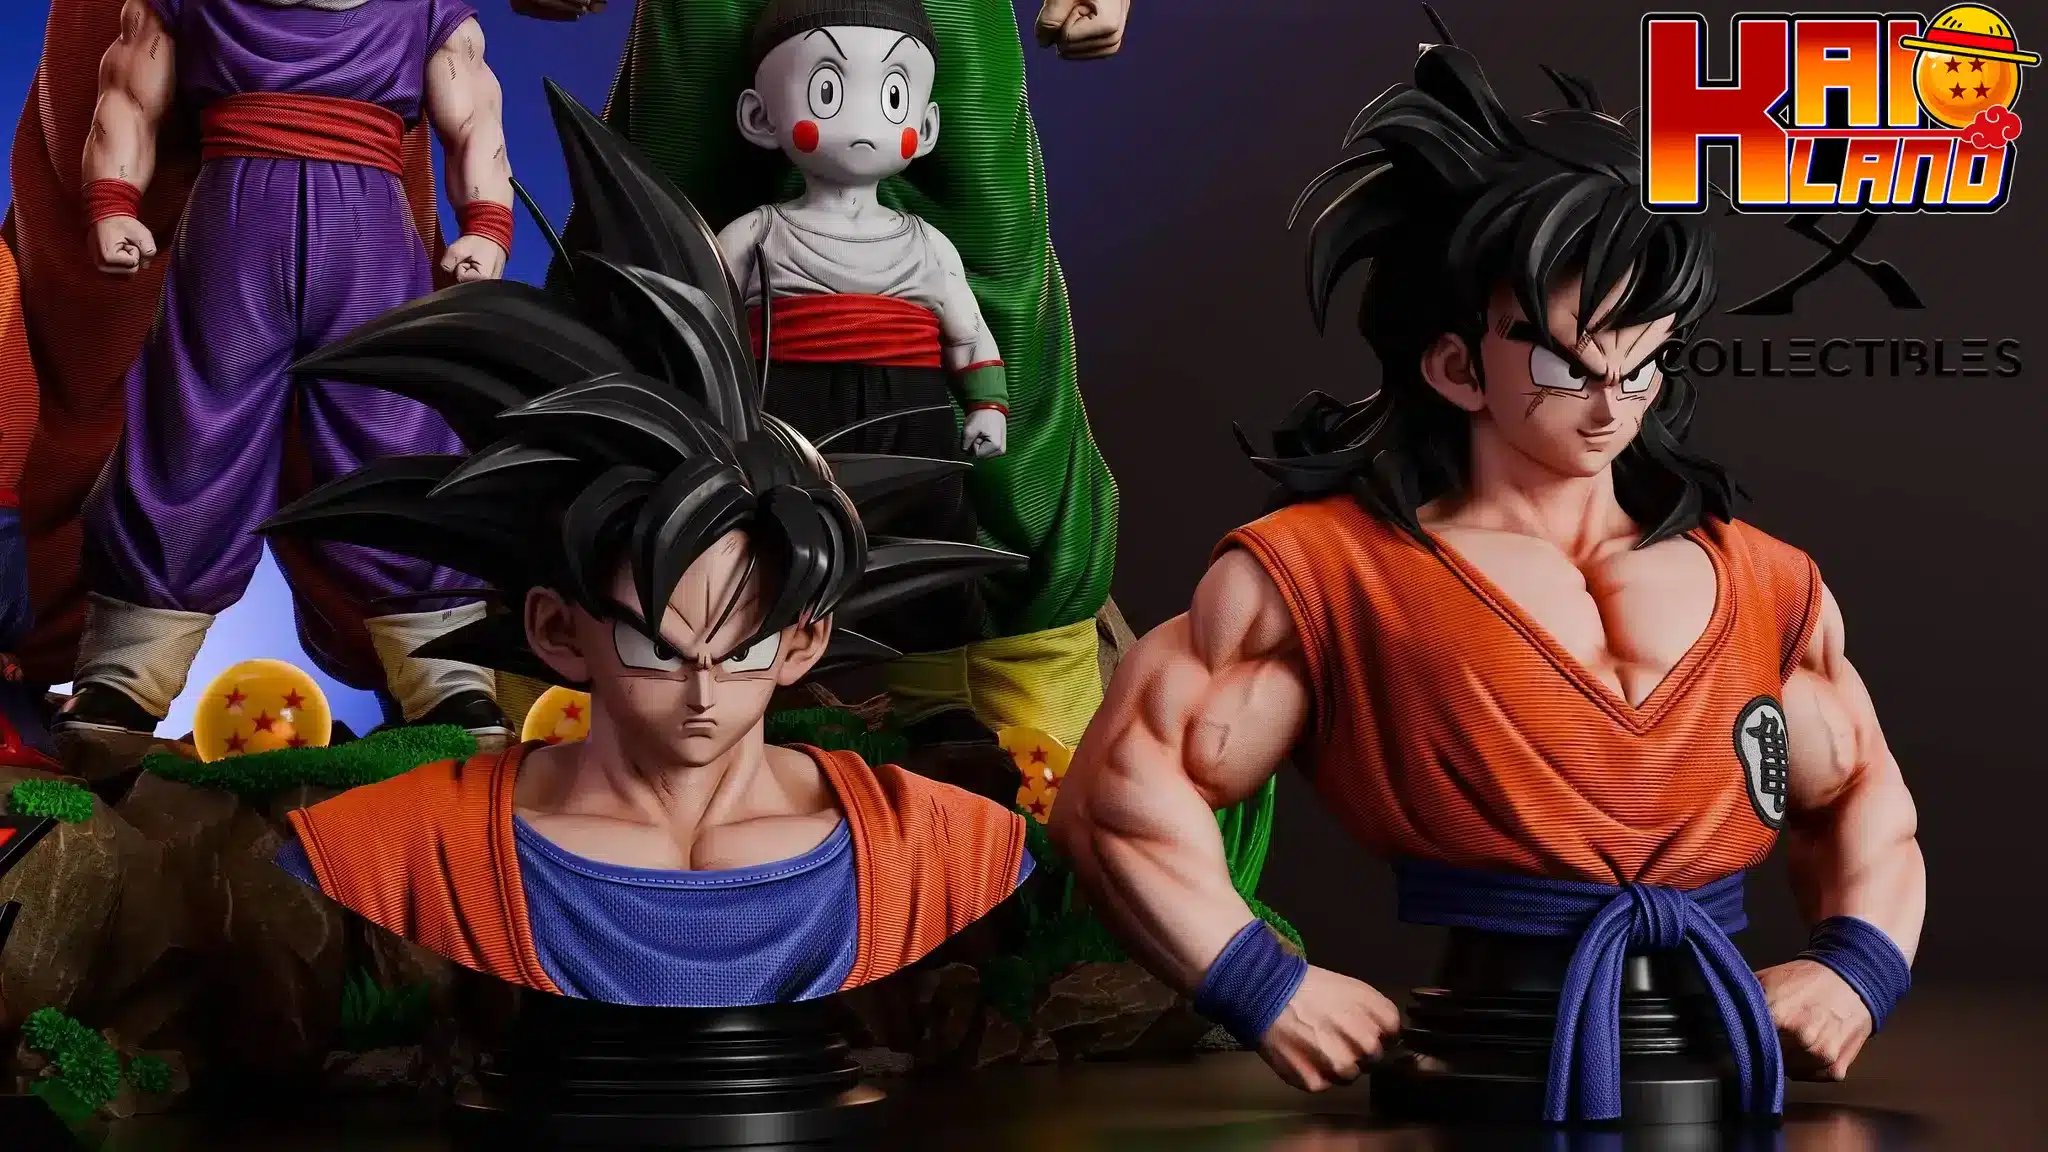 Dragon-Ball-KD-Collectibles-Z-Fighters-Resin-Statue-6-jpg.png